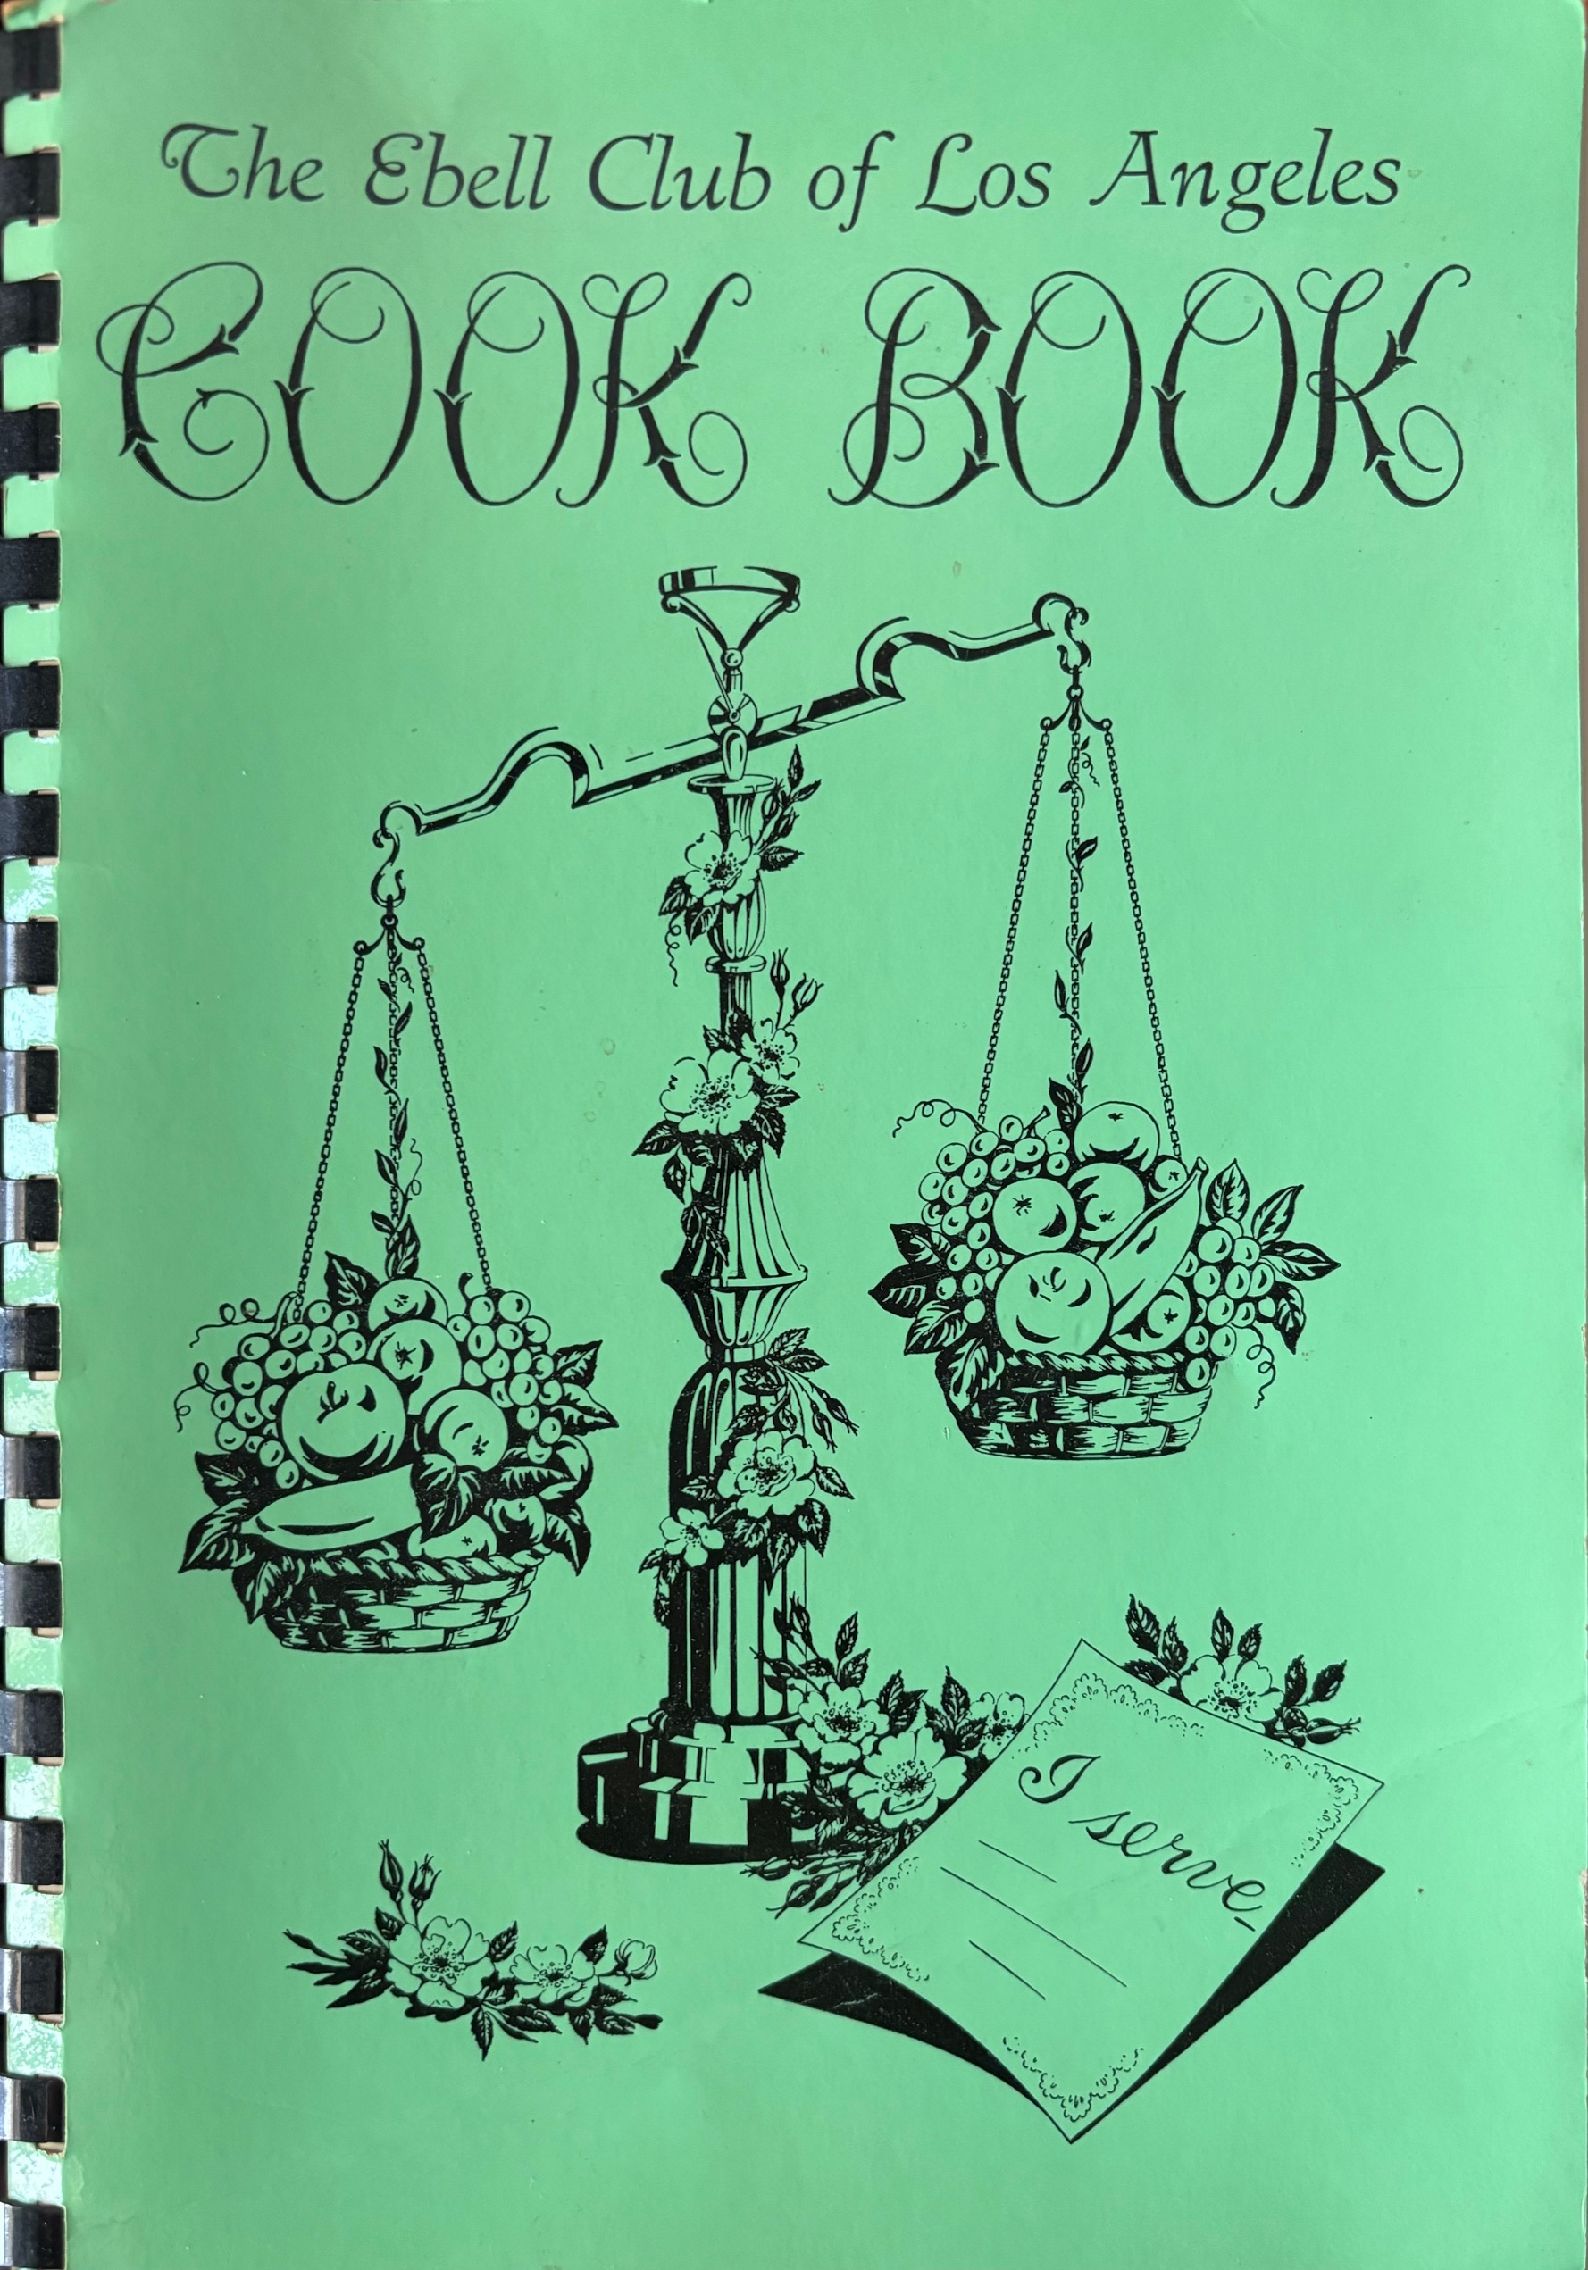 (California - Los Angeles) The Ebell Club of Los Angeles Cook Book